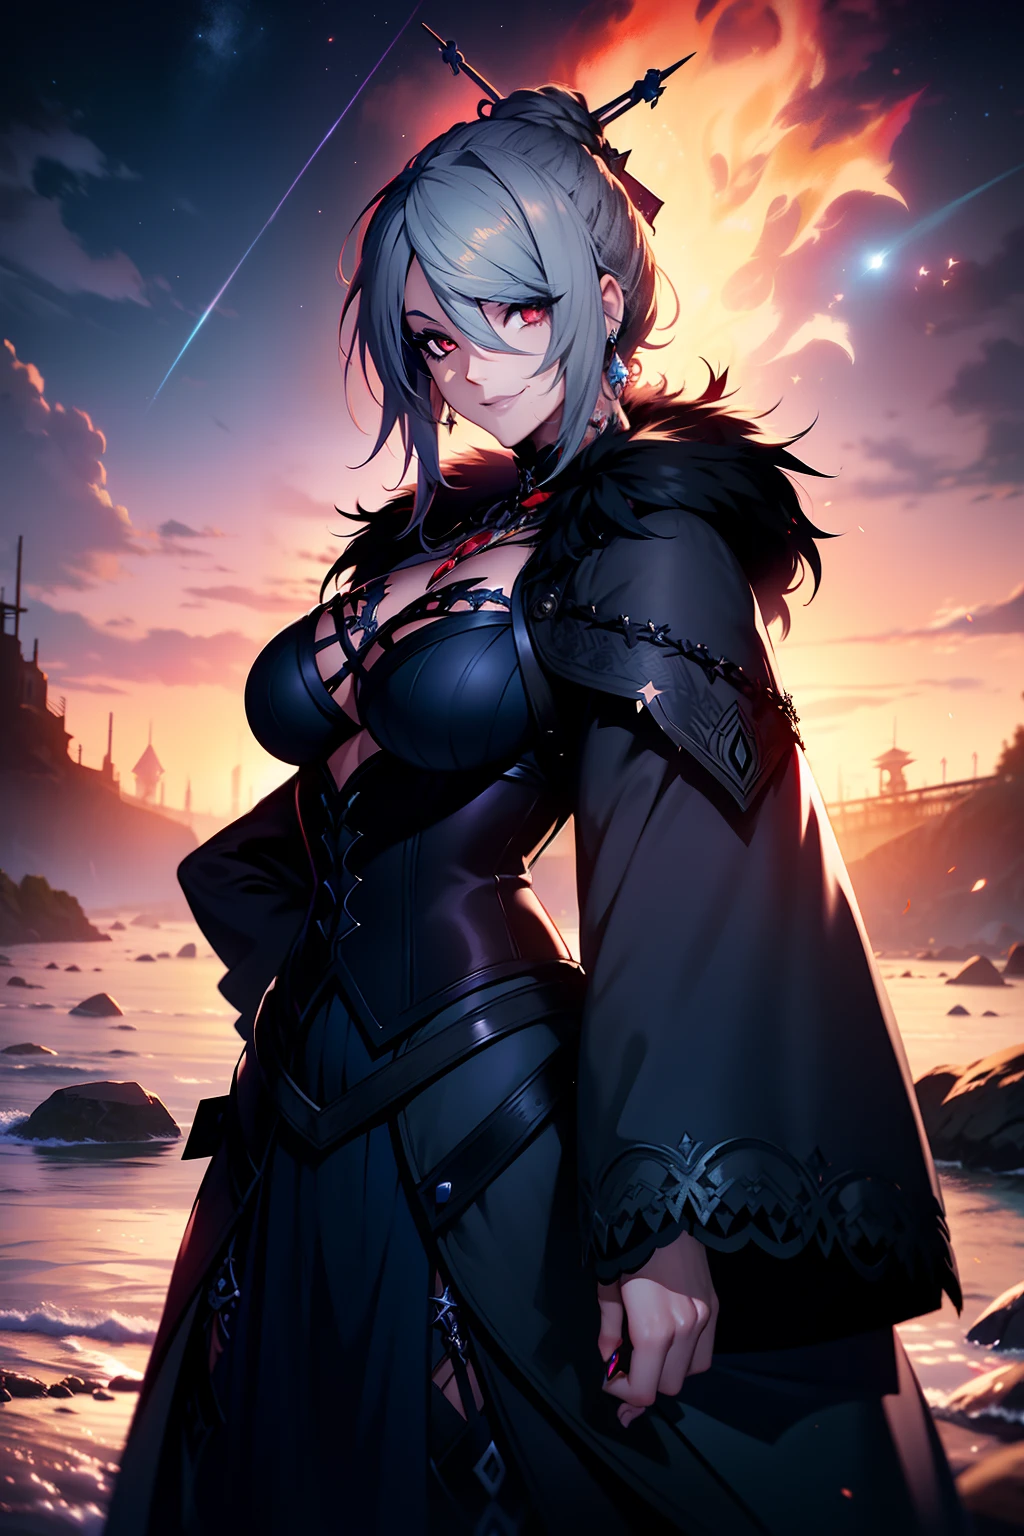 Young Woam, white hair, fur dress, arms tattoed, dark eye shadows, red eyes, smiling, on a beach, at night, stars in the sky, dark blue sky, lit by a fire, 4k, Gothic style, Lulu, Final Fantasy